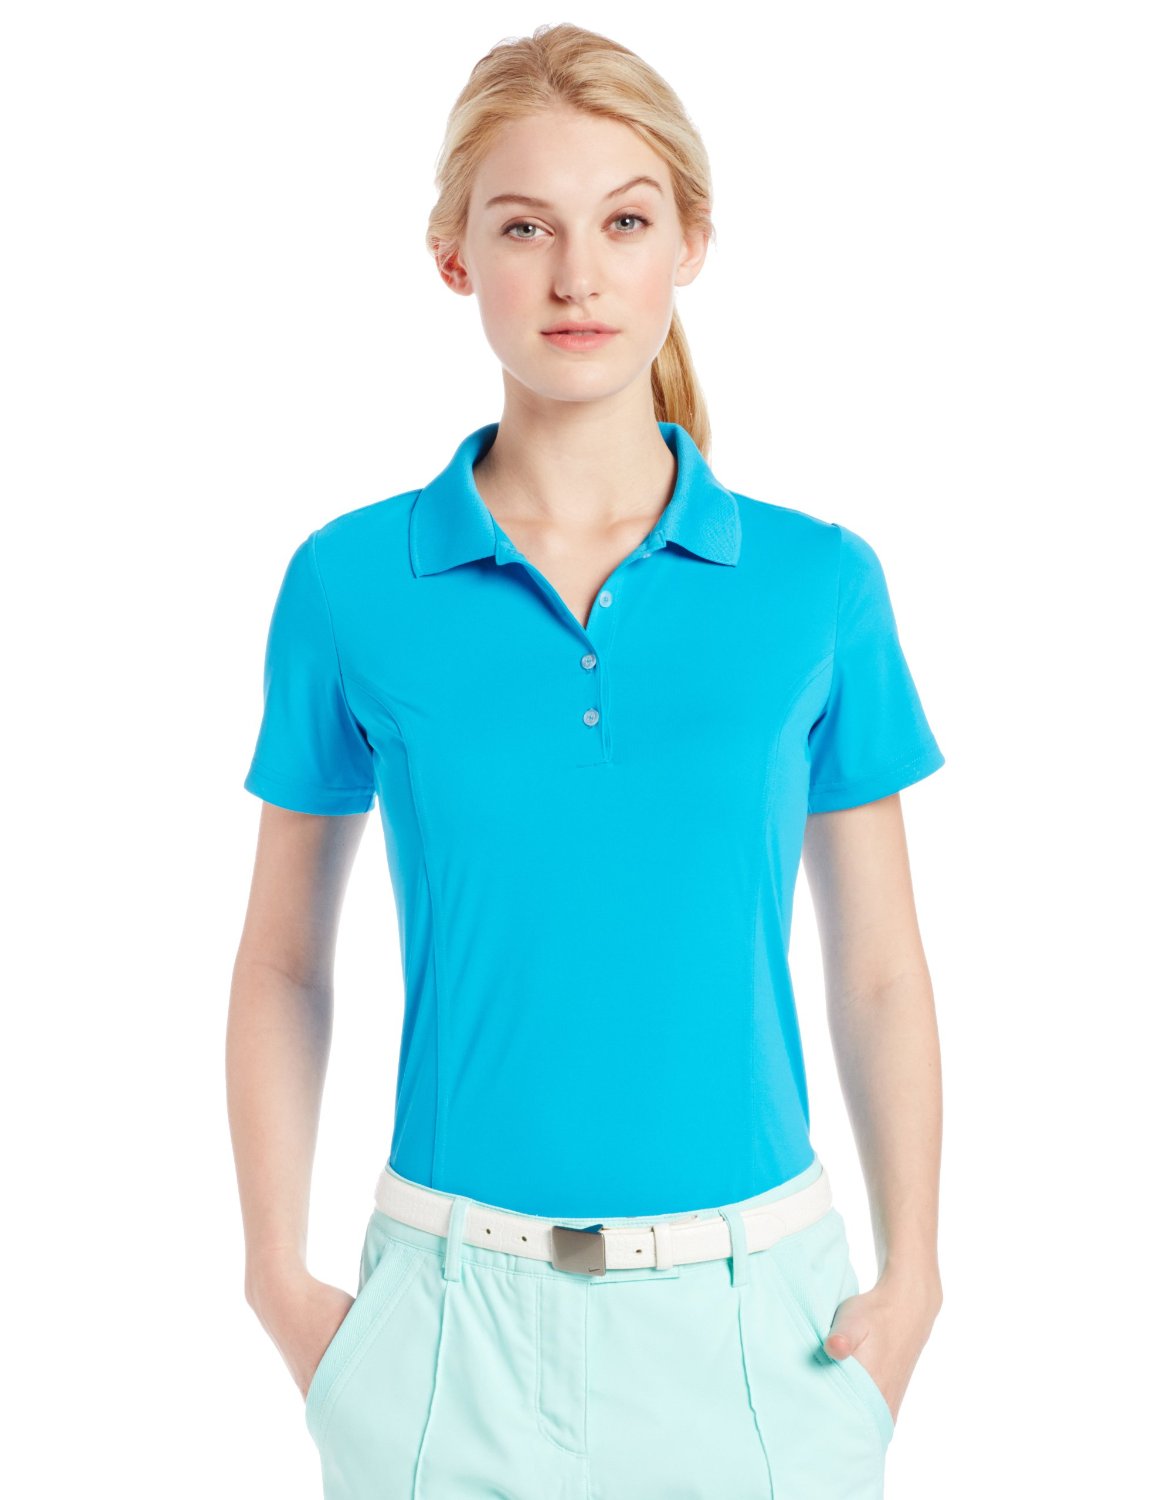 Womens Puremotion Solid Jersey Golf Polo Shirts